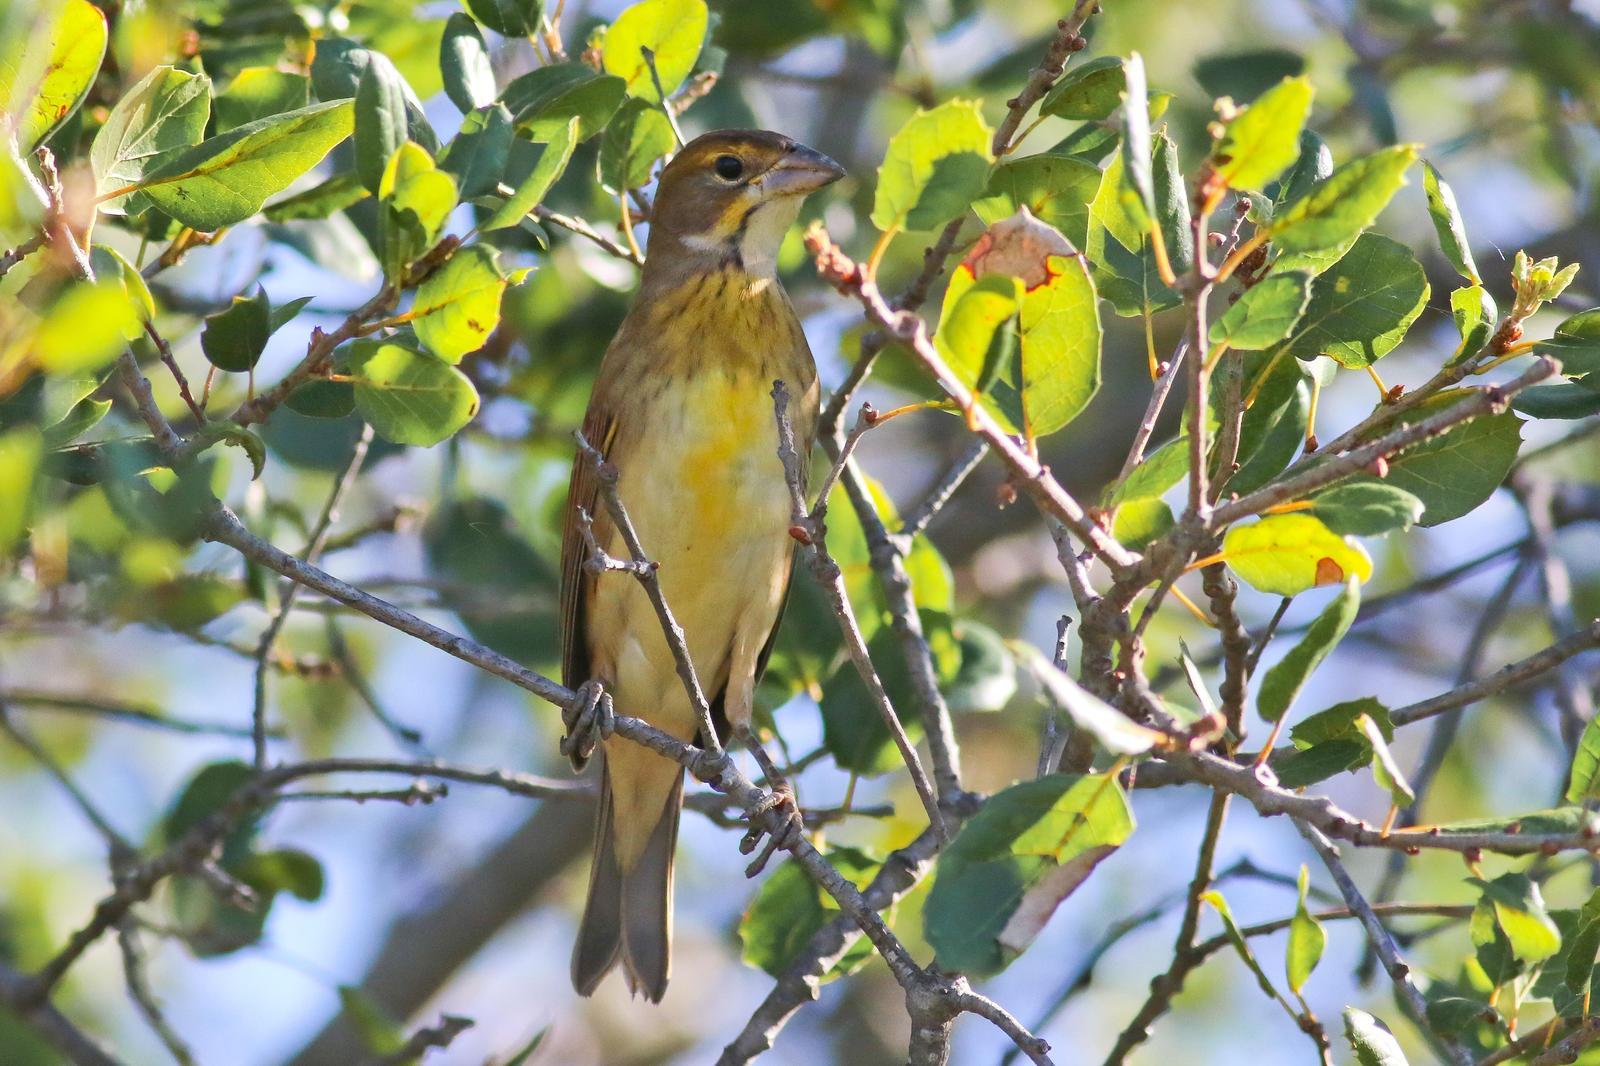 Dickcissel Photo by Tom Ford-Hutchinson